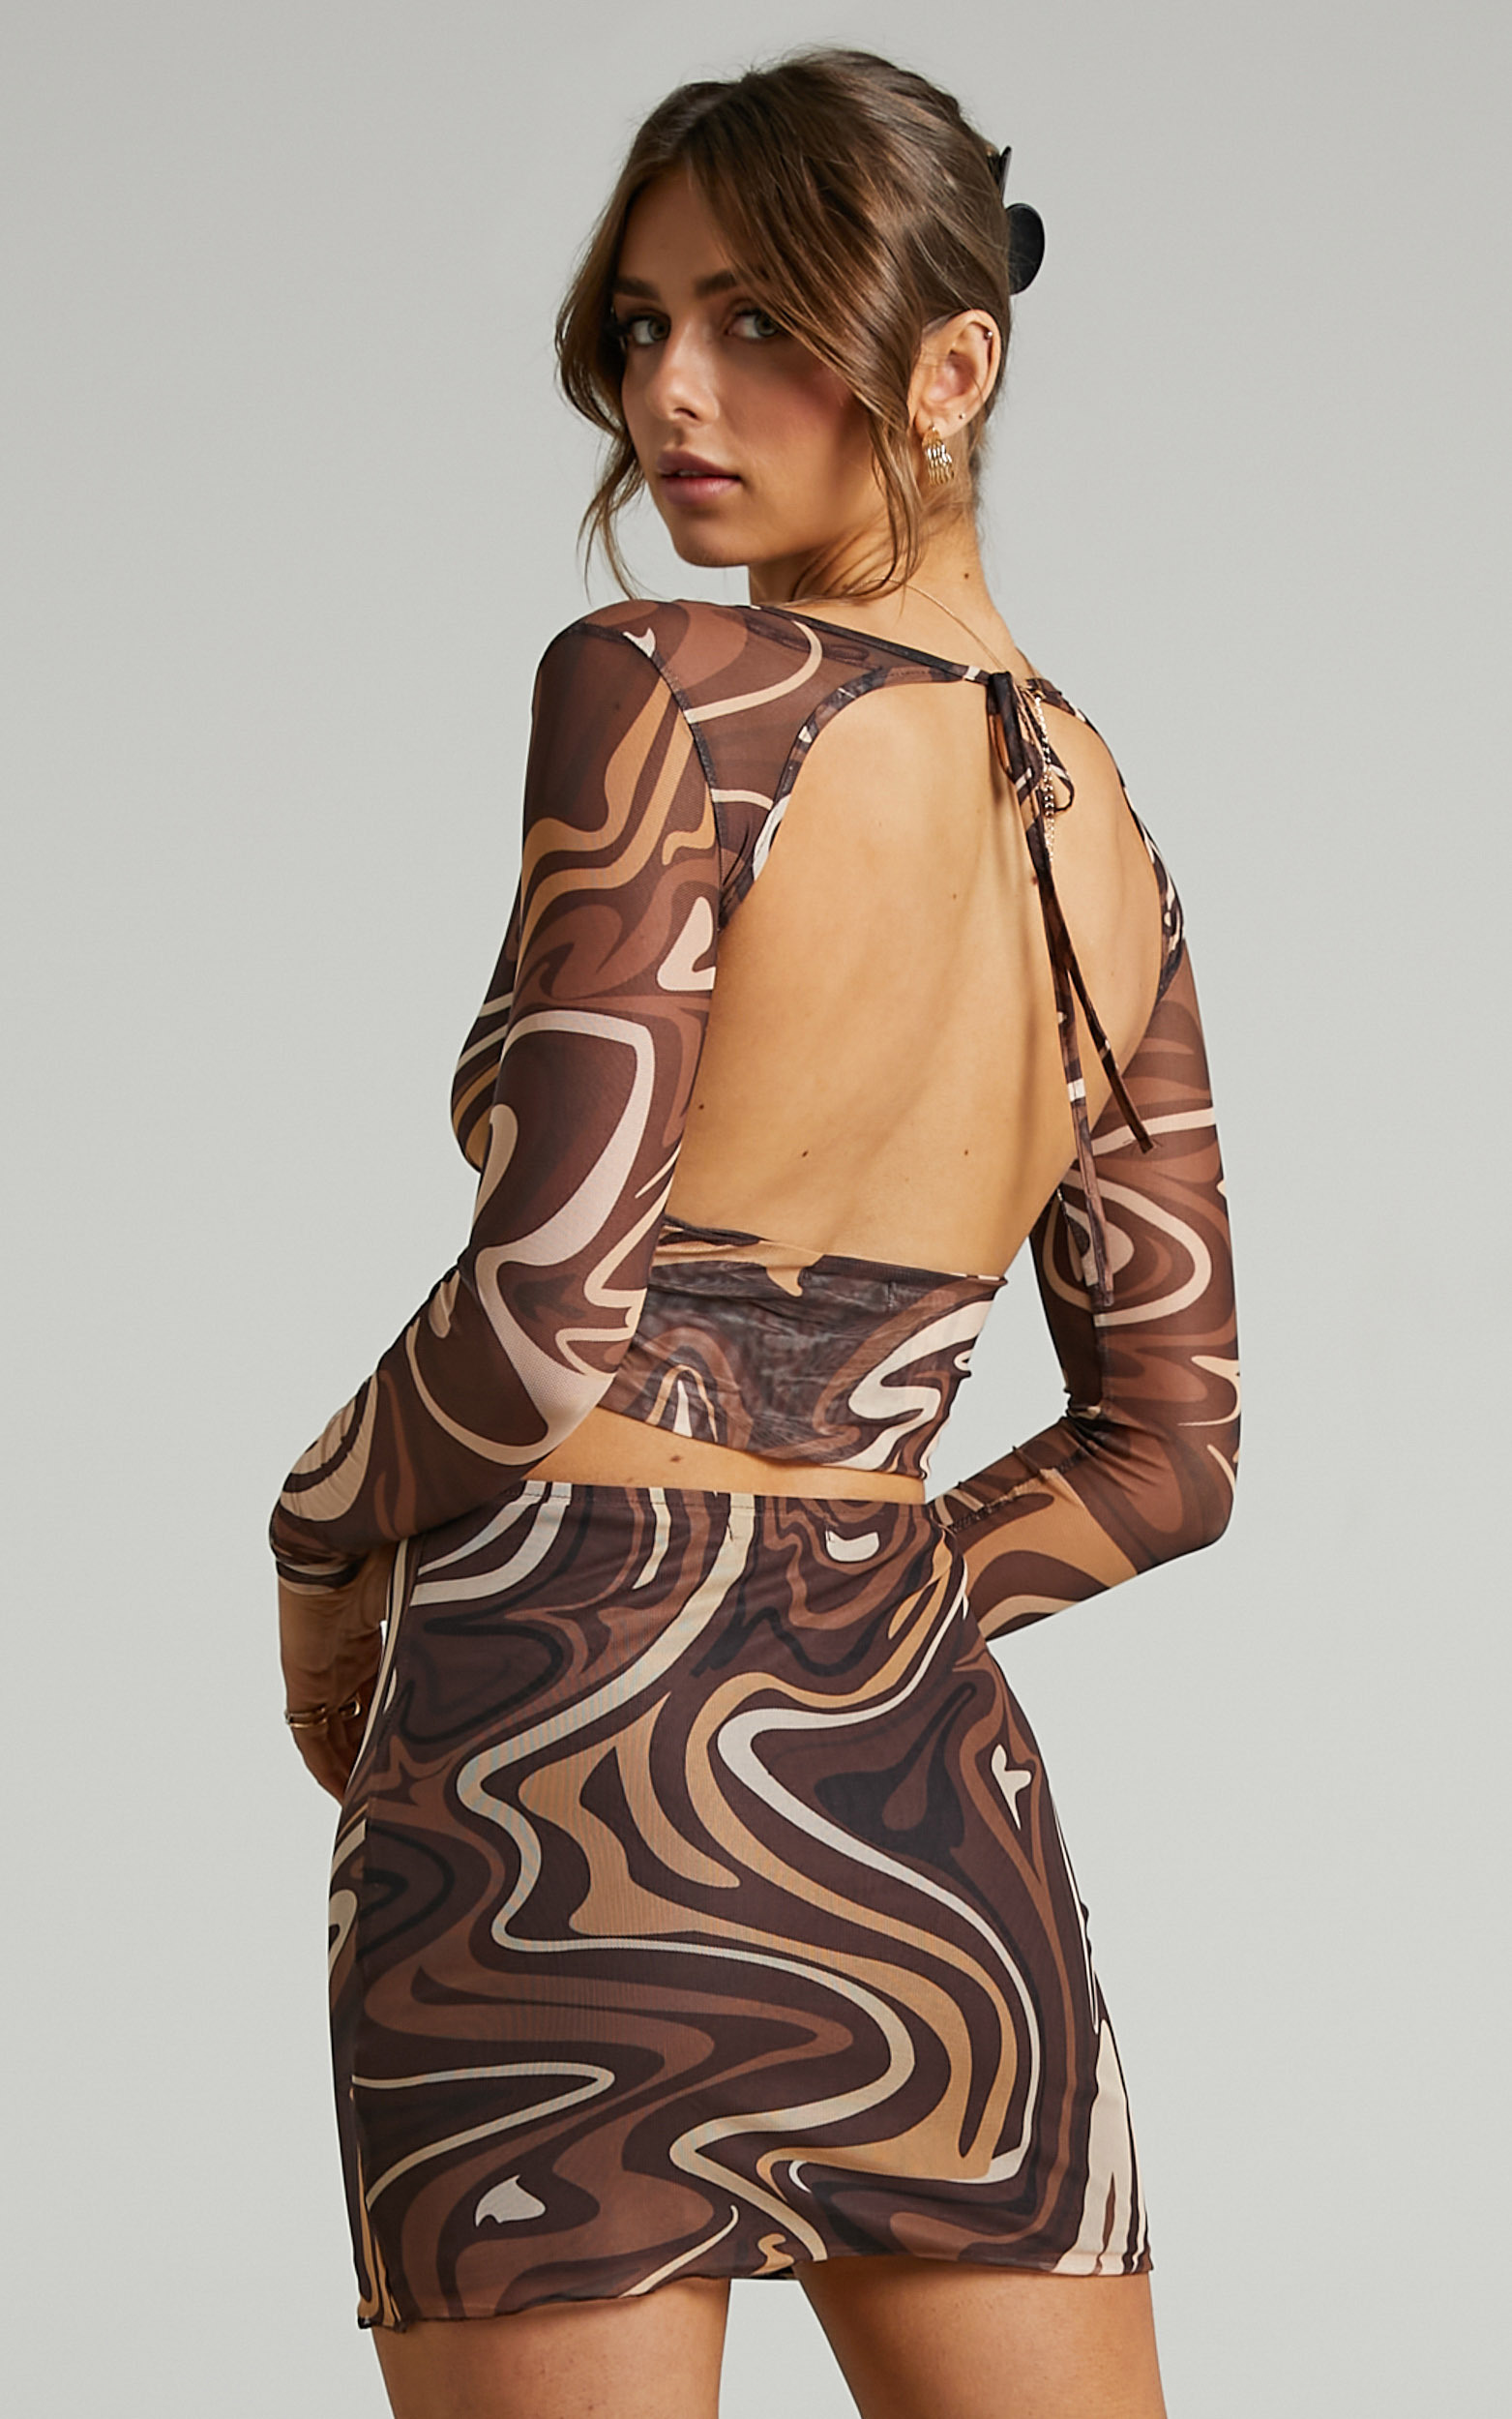 Ababa Retro Swirl Mini Skirt in Chocolate - 06, BRN1, hi-res image number null